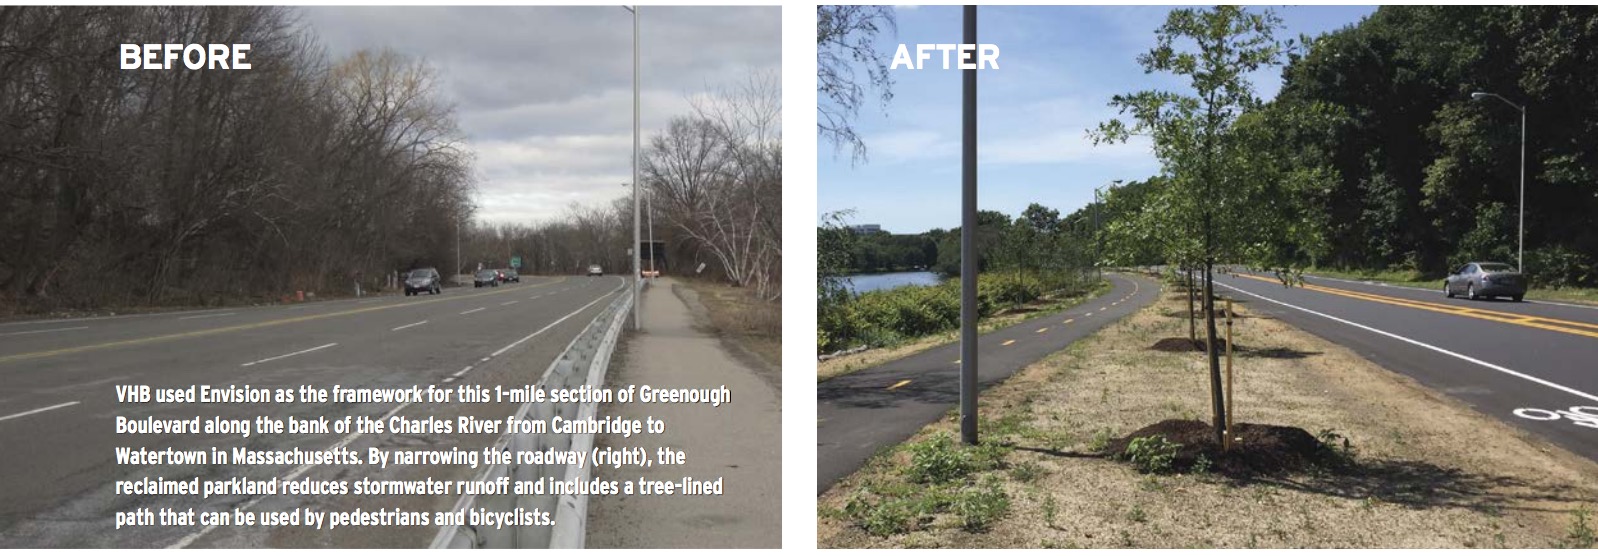 VHB used Envision as the framework for this 1-mile section of Greenough Boulevard along the bank of the Charles River from Cambridge to Watertown in Massachusetts. By narrowing the roadway (right), the reclaimed parkland reduces stormwater runoff and includes a tree-lined path that can be used by pedestrians and bicyclists. 